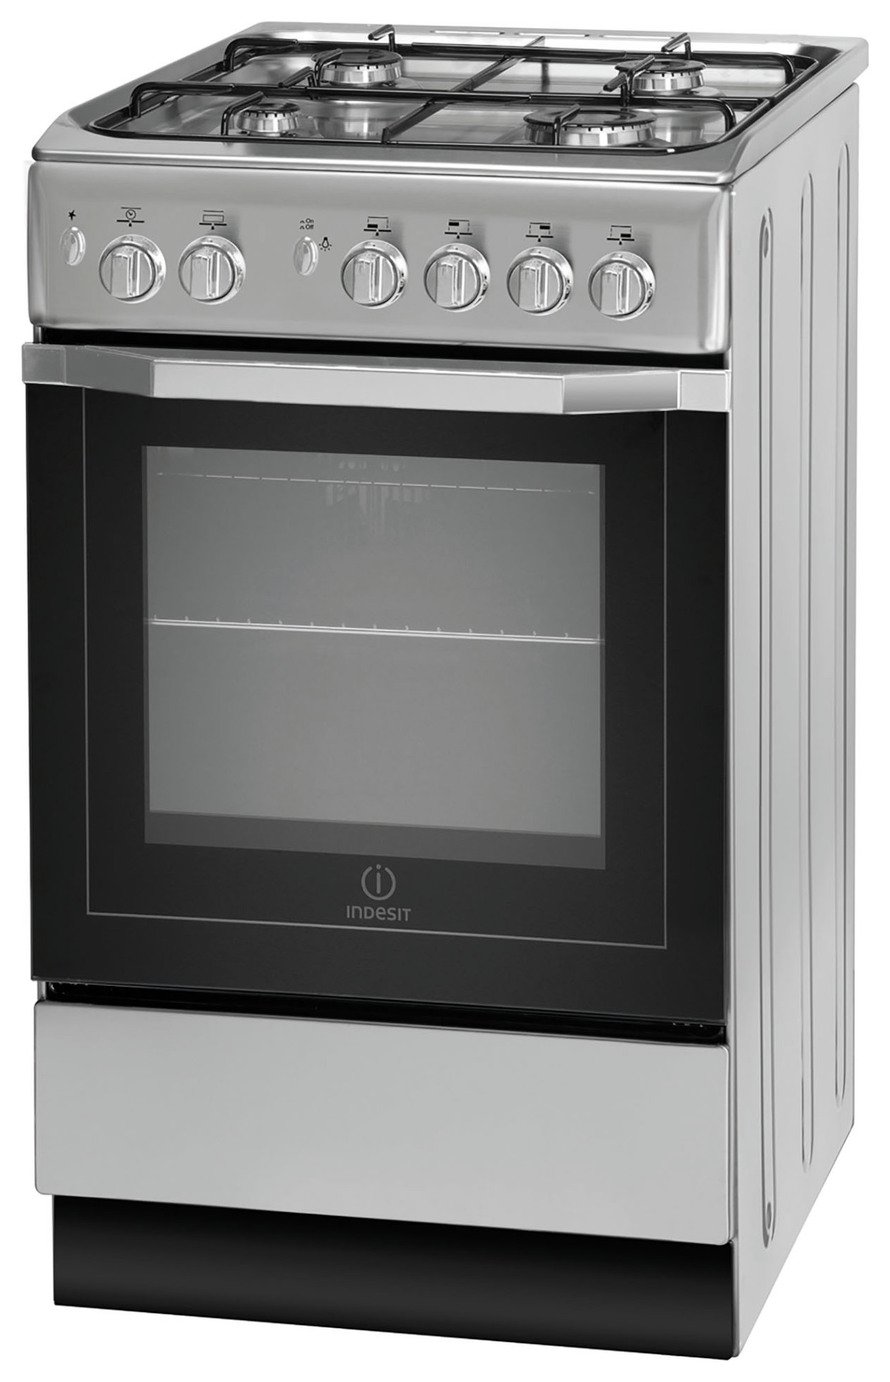 Indesit I5GG1S Single Gas Cooker - Silver